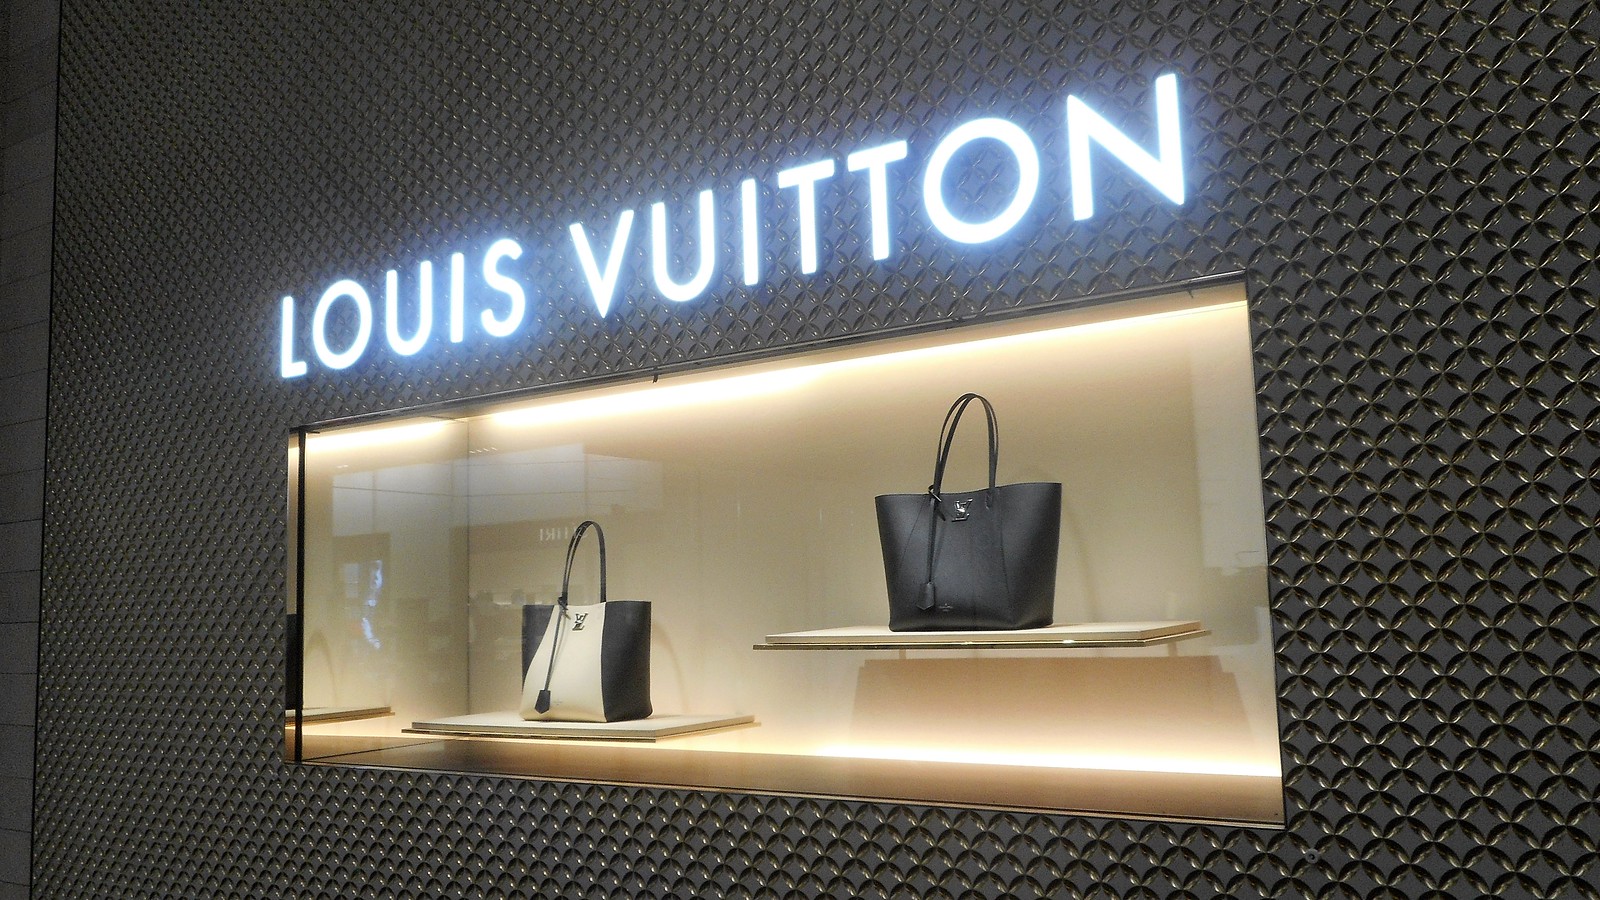 Compare Working At Nordstrom Vs Louis Vuitton